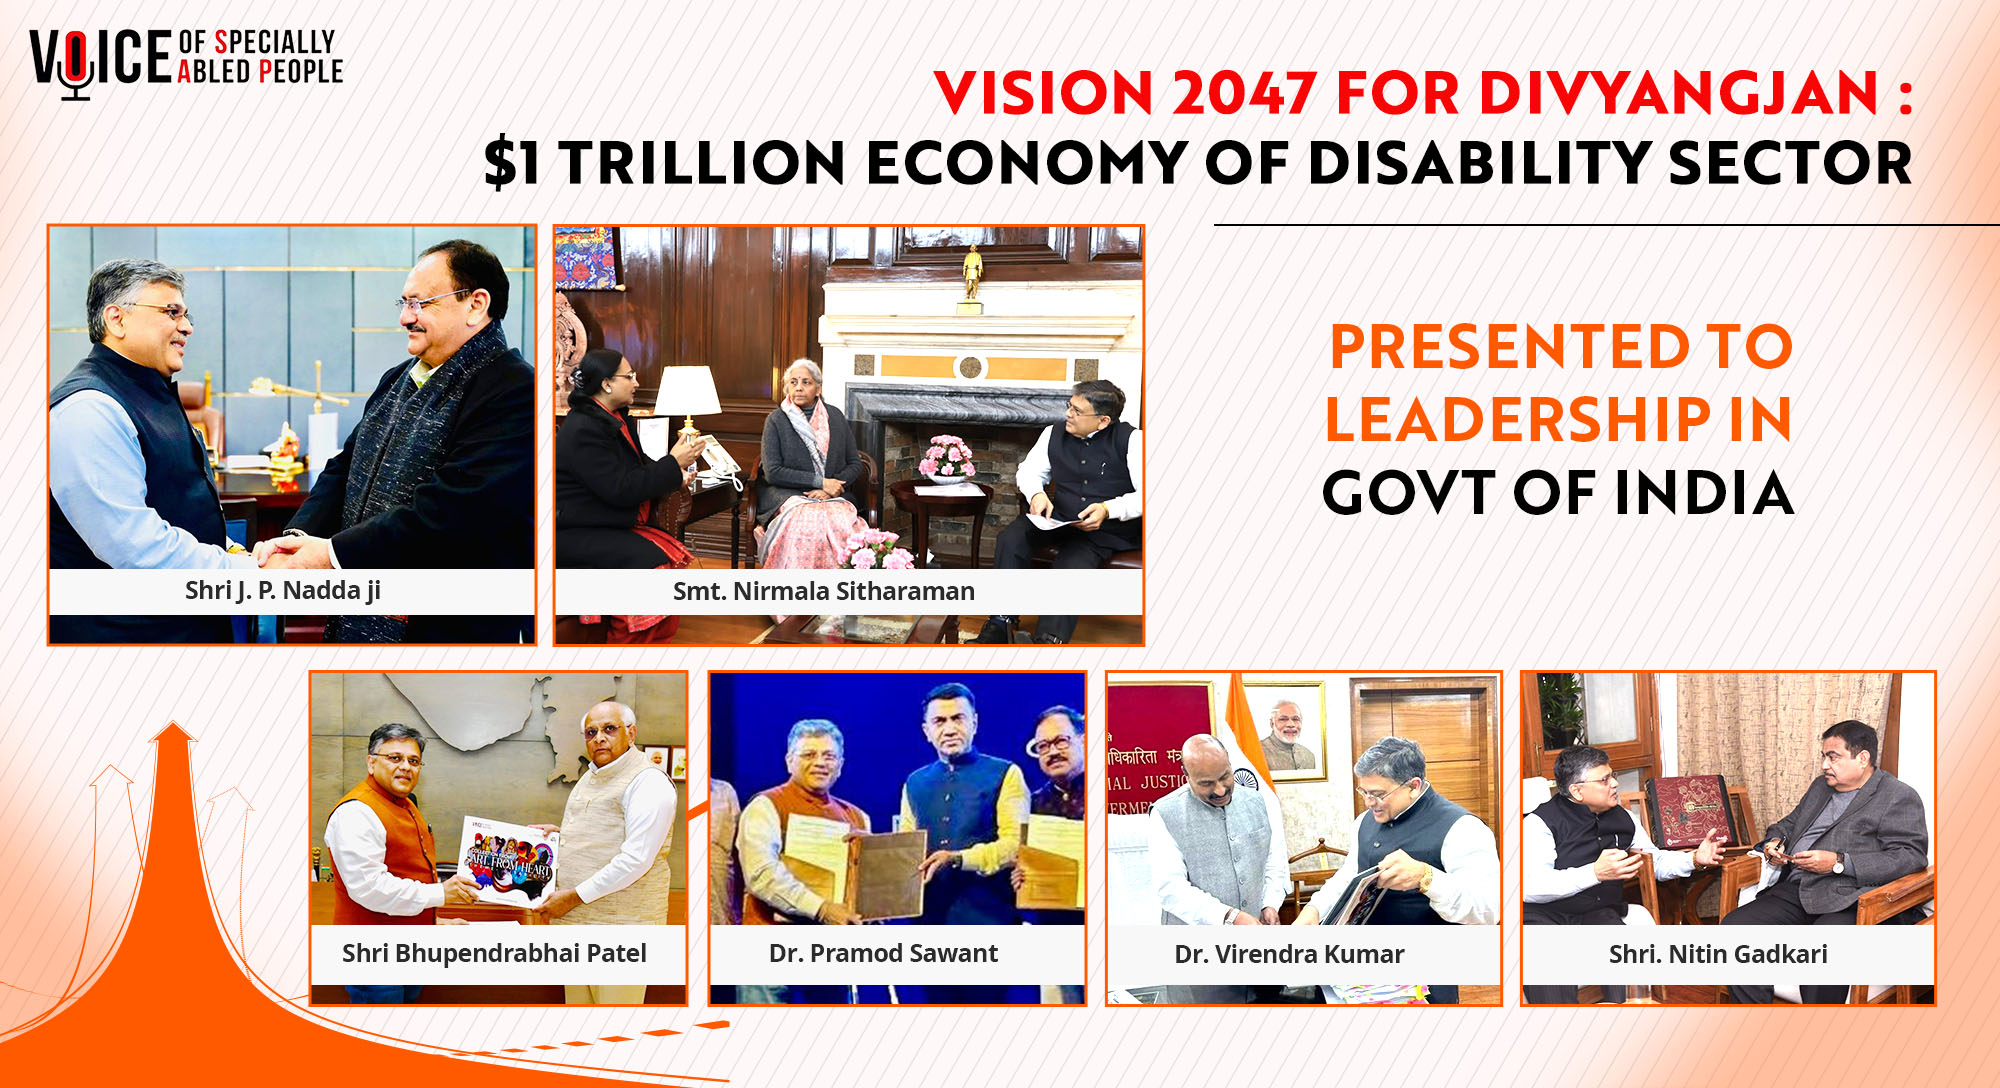 Vision 2047 for Divyangjan presented to Leadership in Government of India